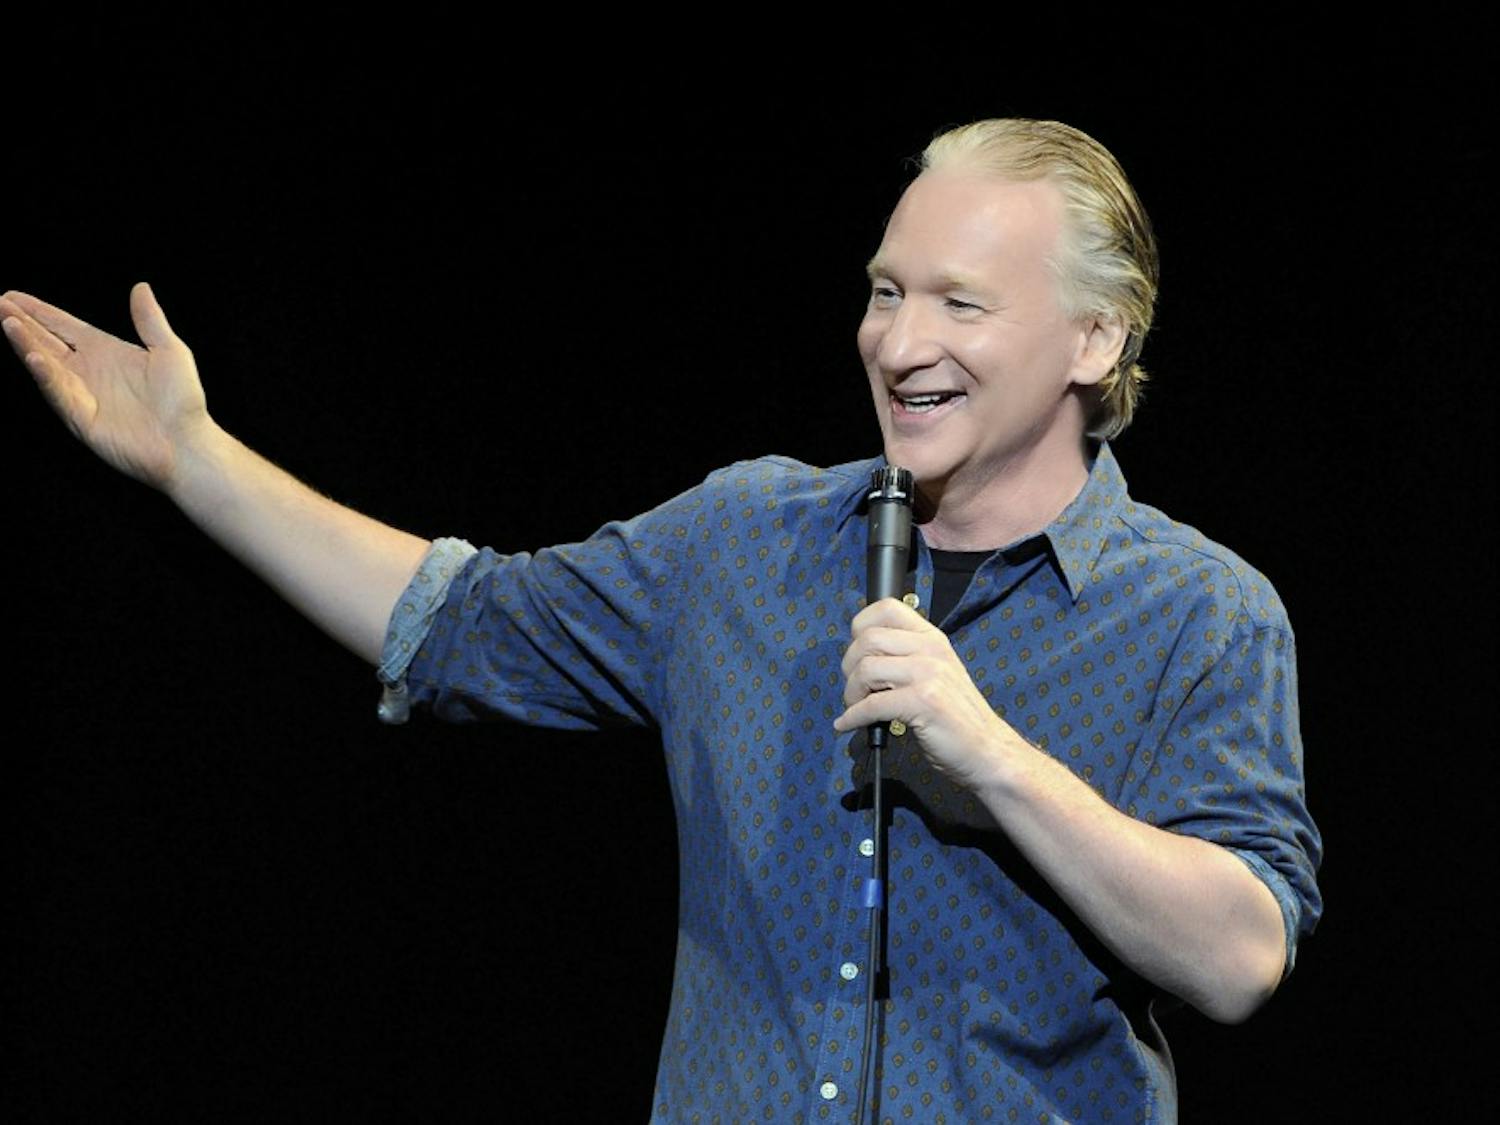 LAS VEGAS, NV - MARCH 23:  Television host and comedian Bill Maher performs at The Pearl concert theater at the Palms Casino Resort on March 23, 2013 in Las Vegas, Nevada.  (Photo by David Becker/WireImage)